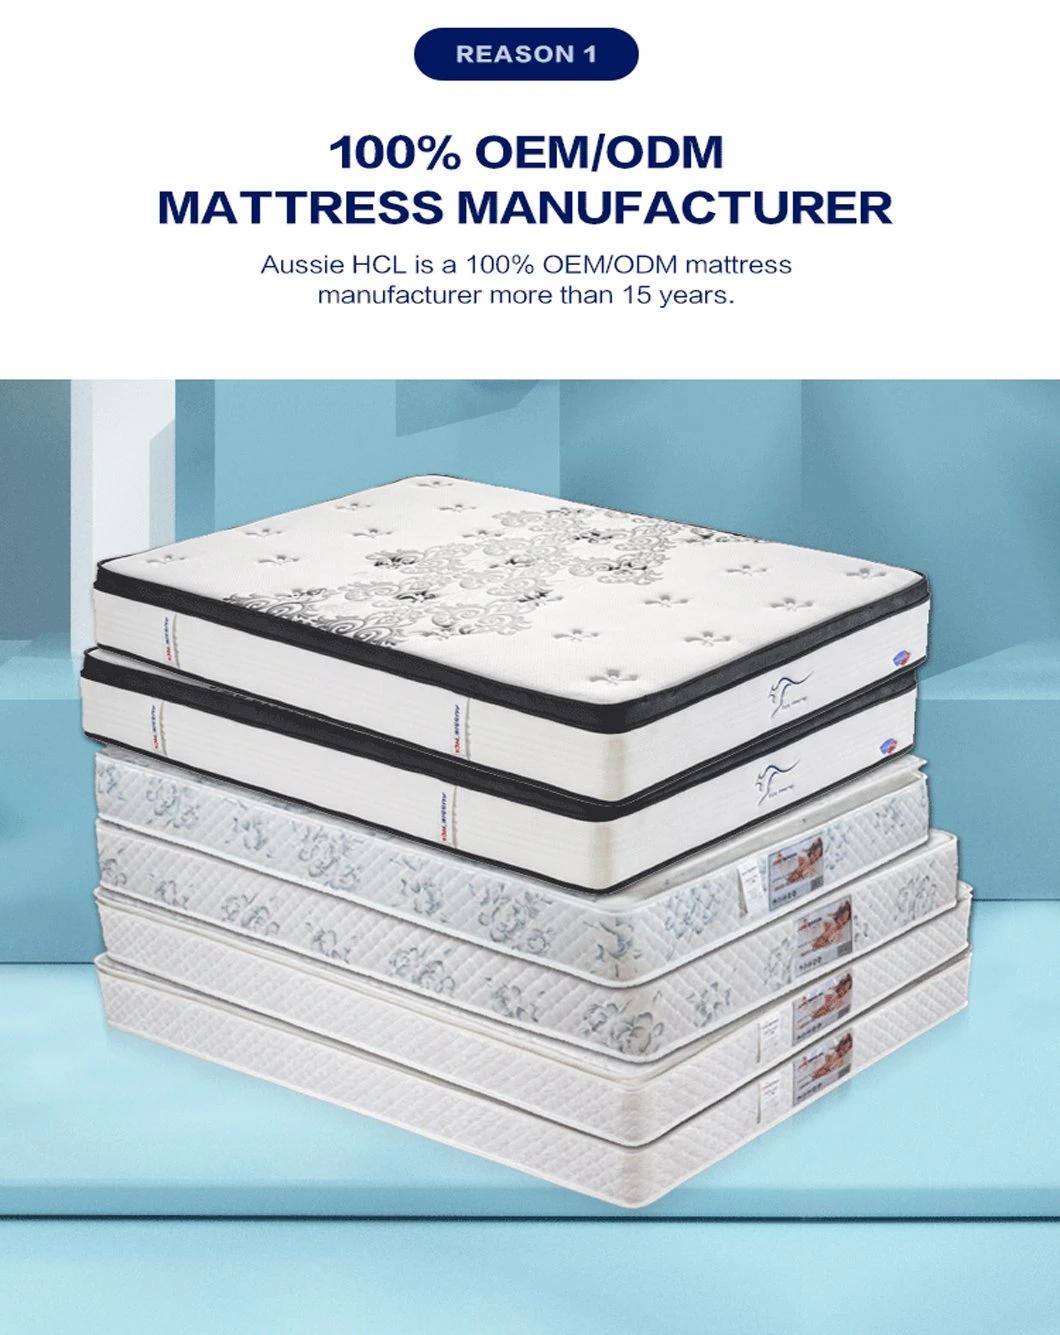 Premium Wholesale Roll Sleeping Well Full Inch Mattresses in a Box King Double Gel Memory Foam Individual Pocket Spring Mattress